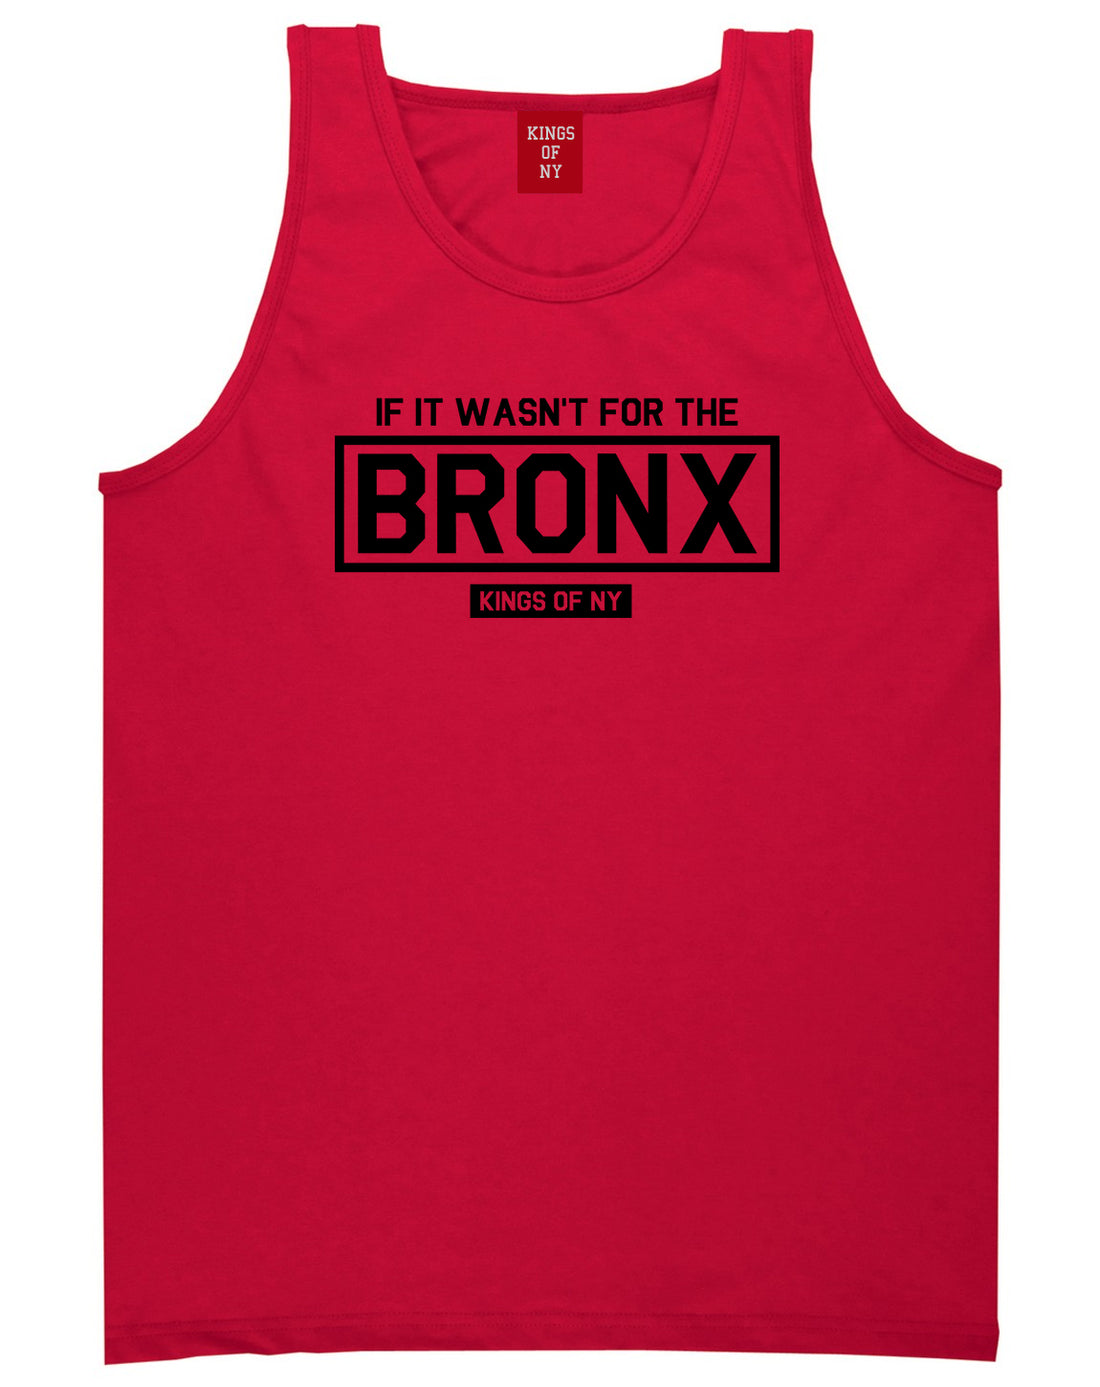 If It Wasnt For The Bronx Mens Tank Top Shirt Red by Kings Of NY